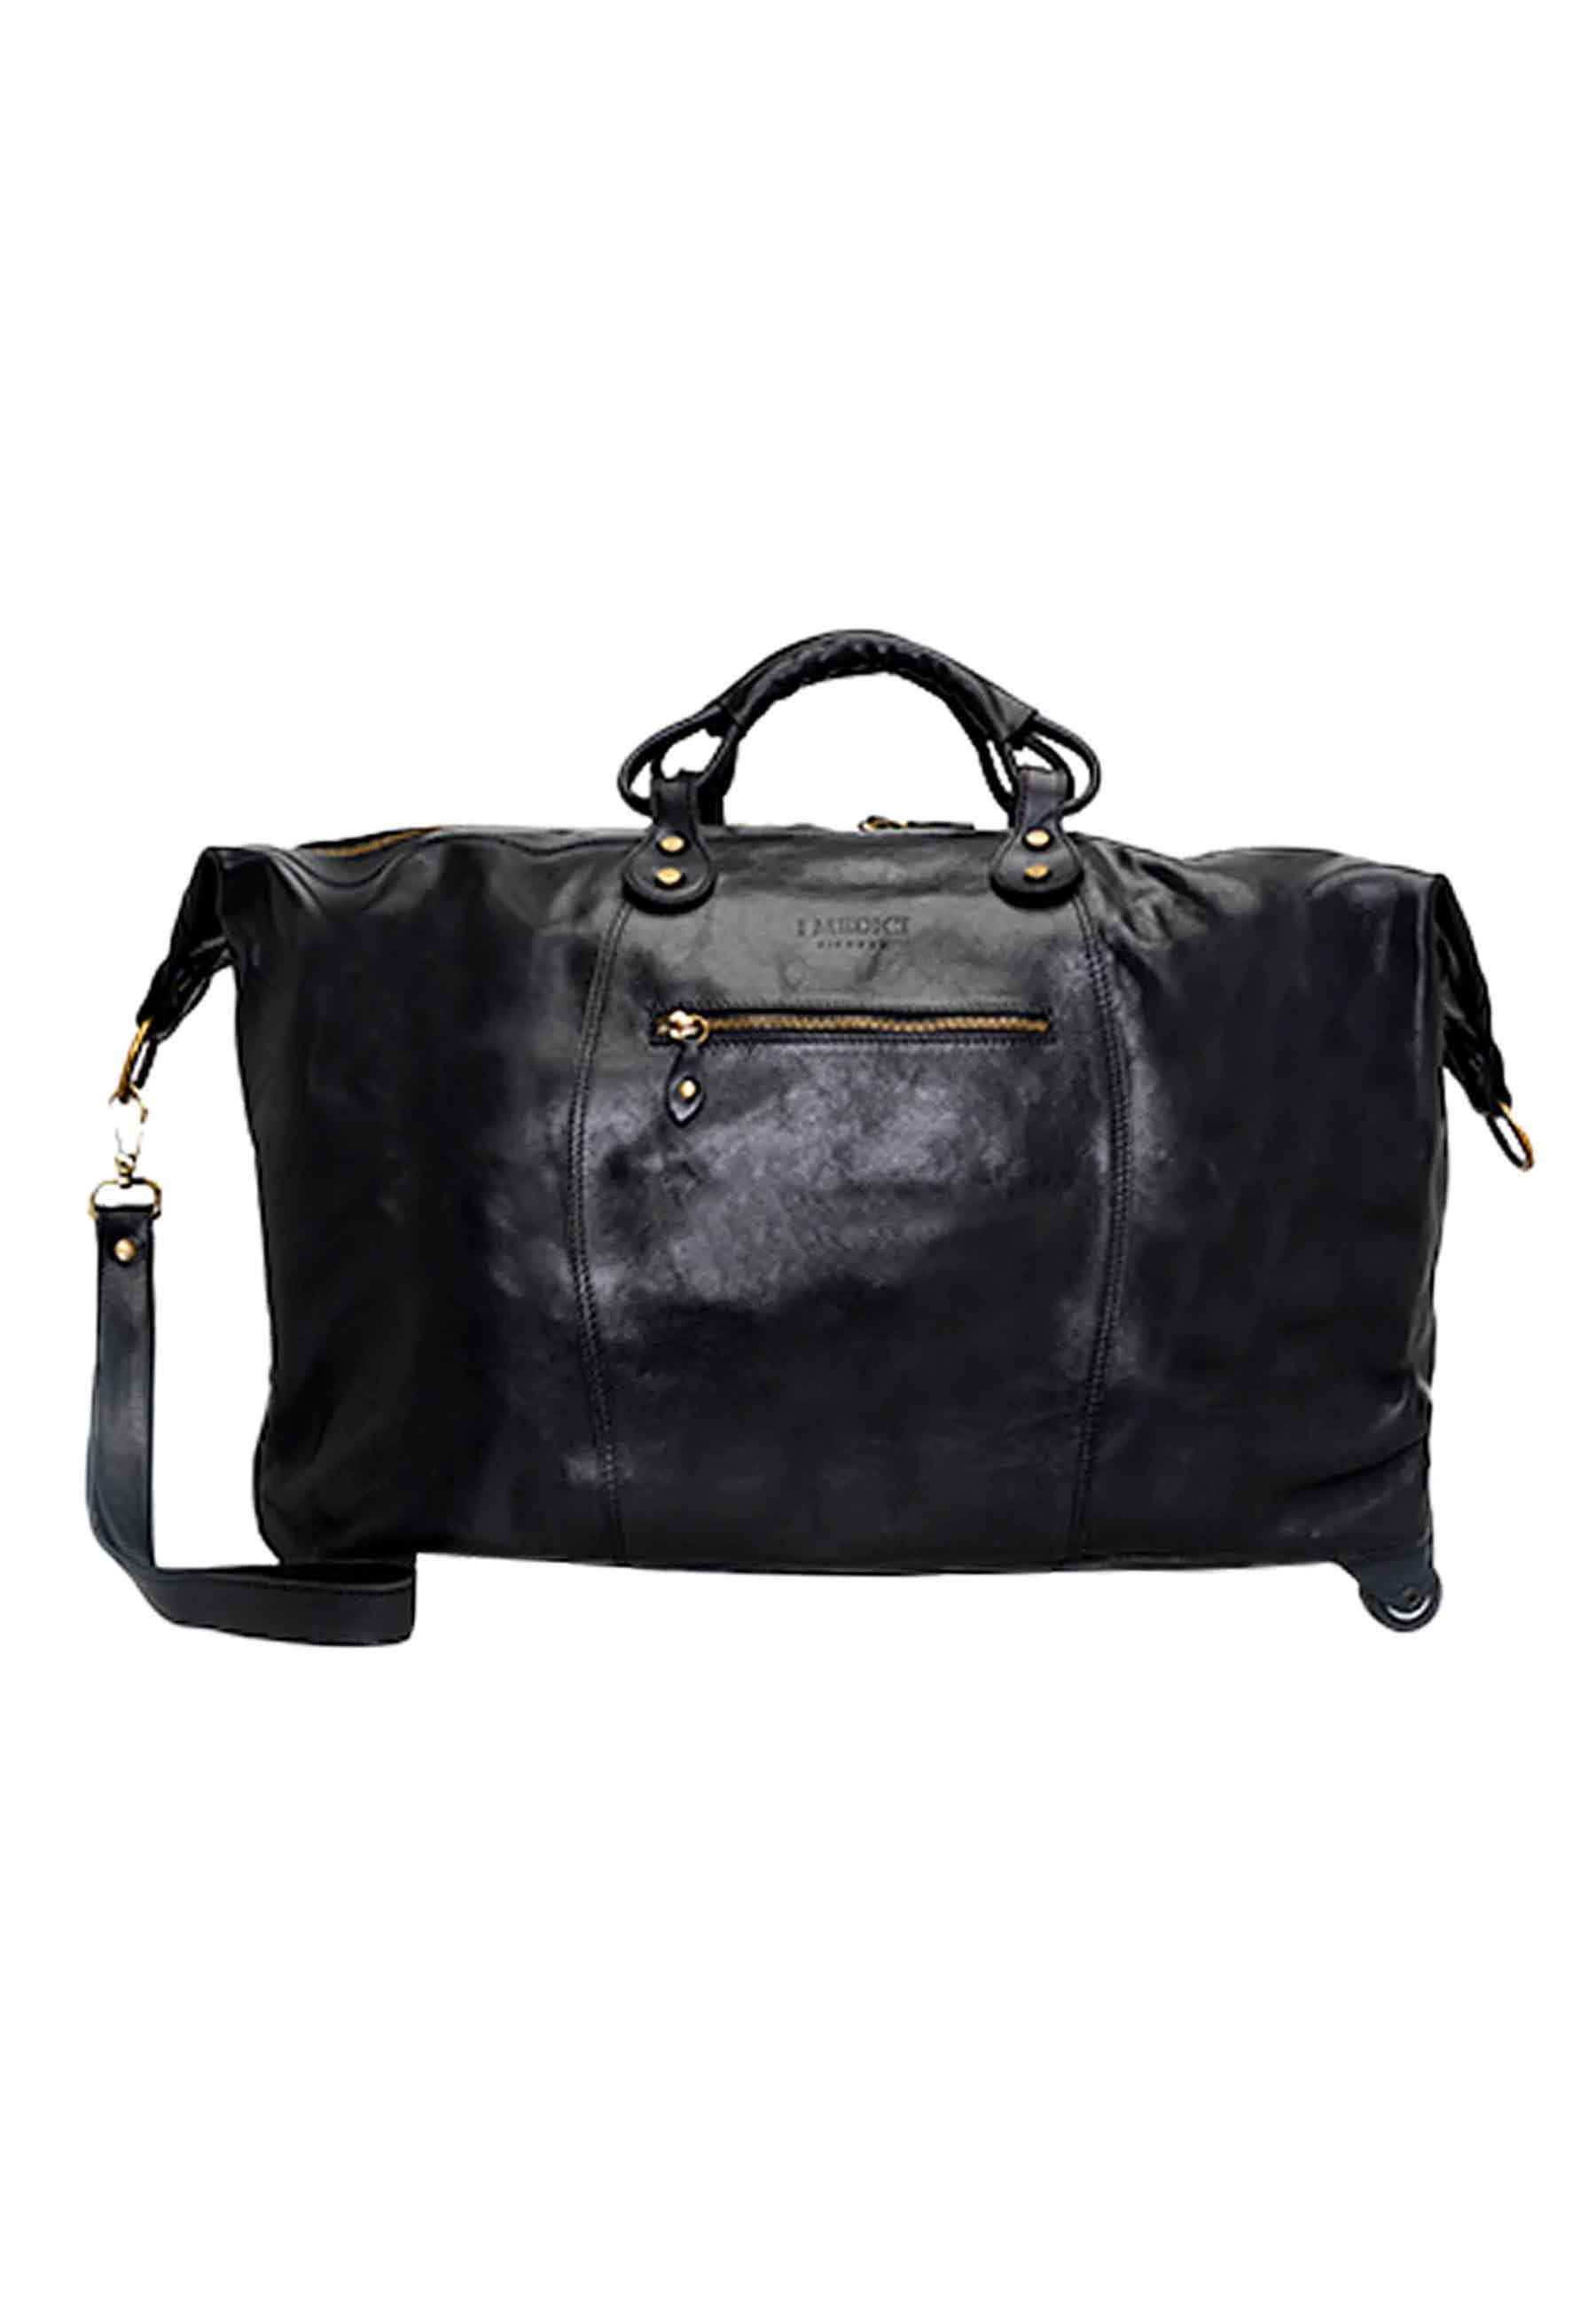 Men's black leather trolley bag with leather strap